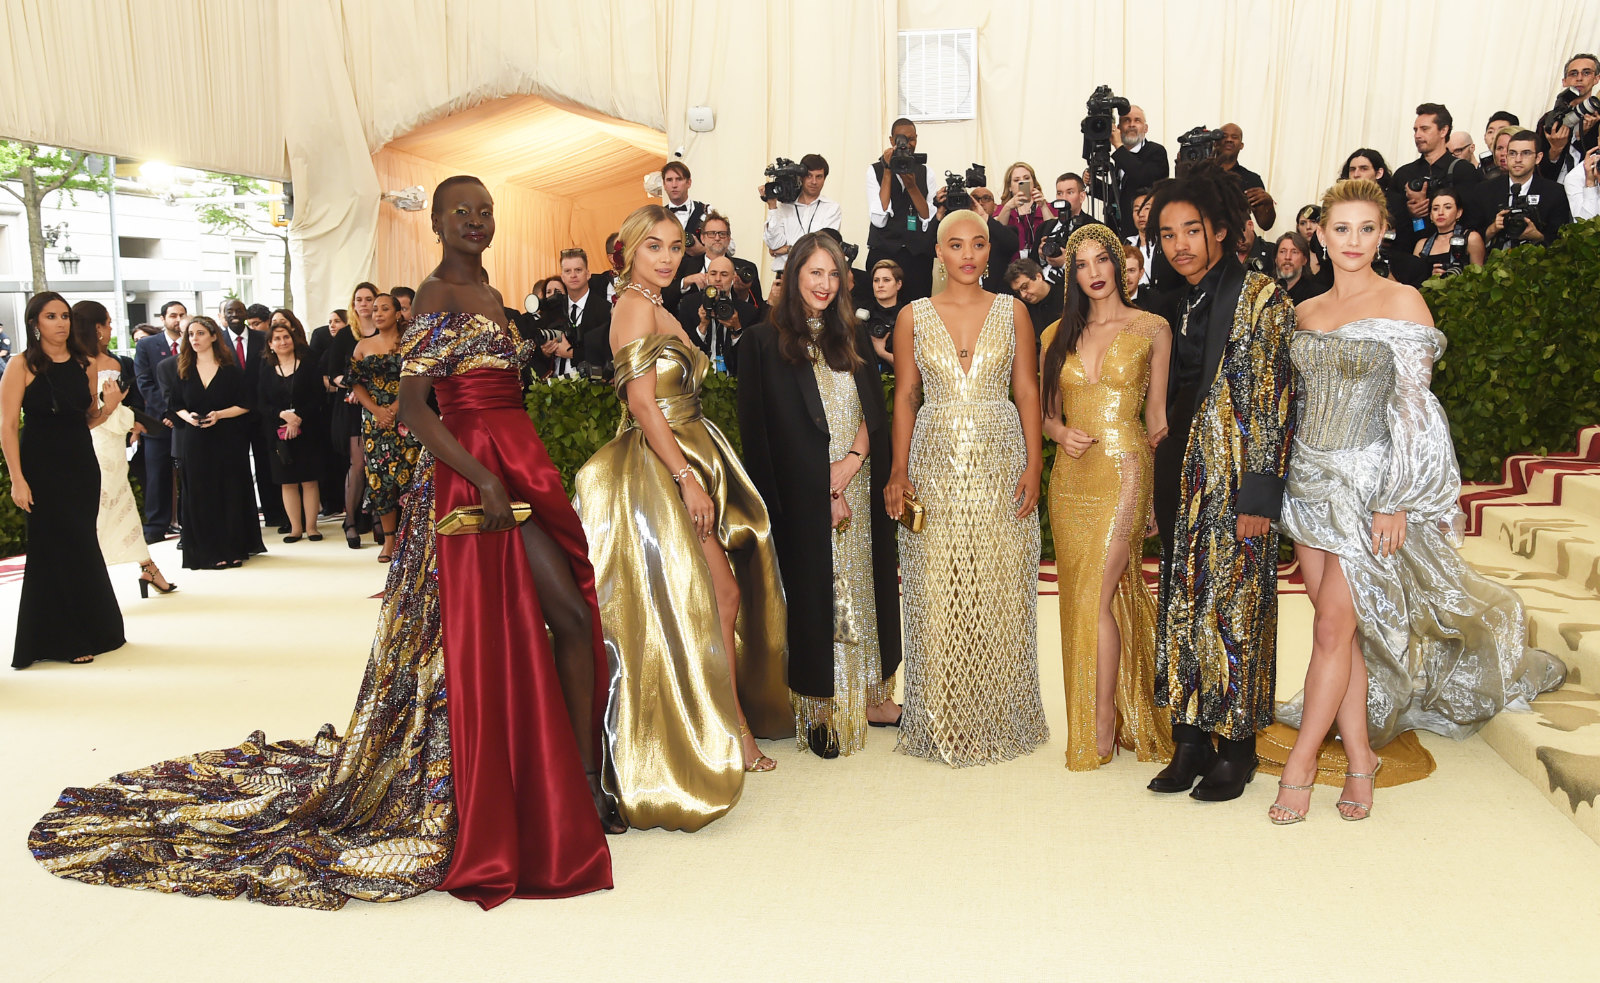 Met Gala Theme 2018: How Will Fashion And Religion Be Tackled?